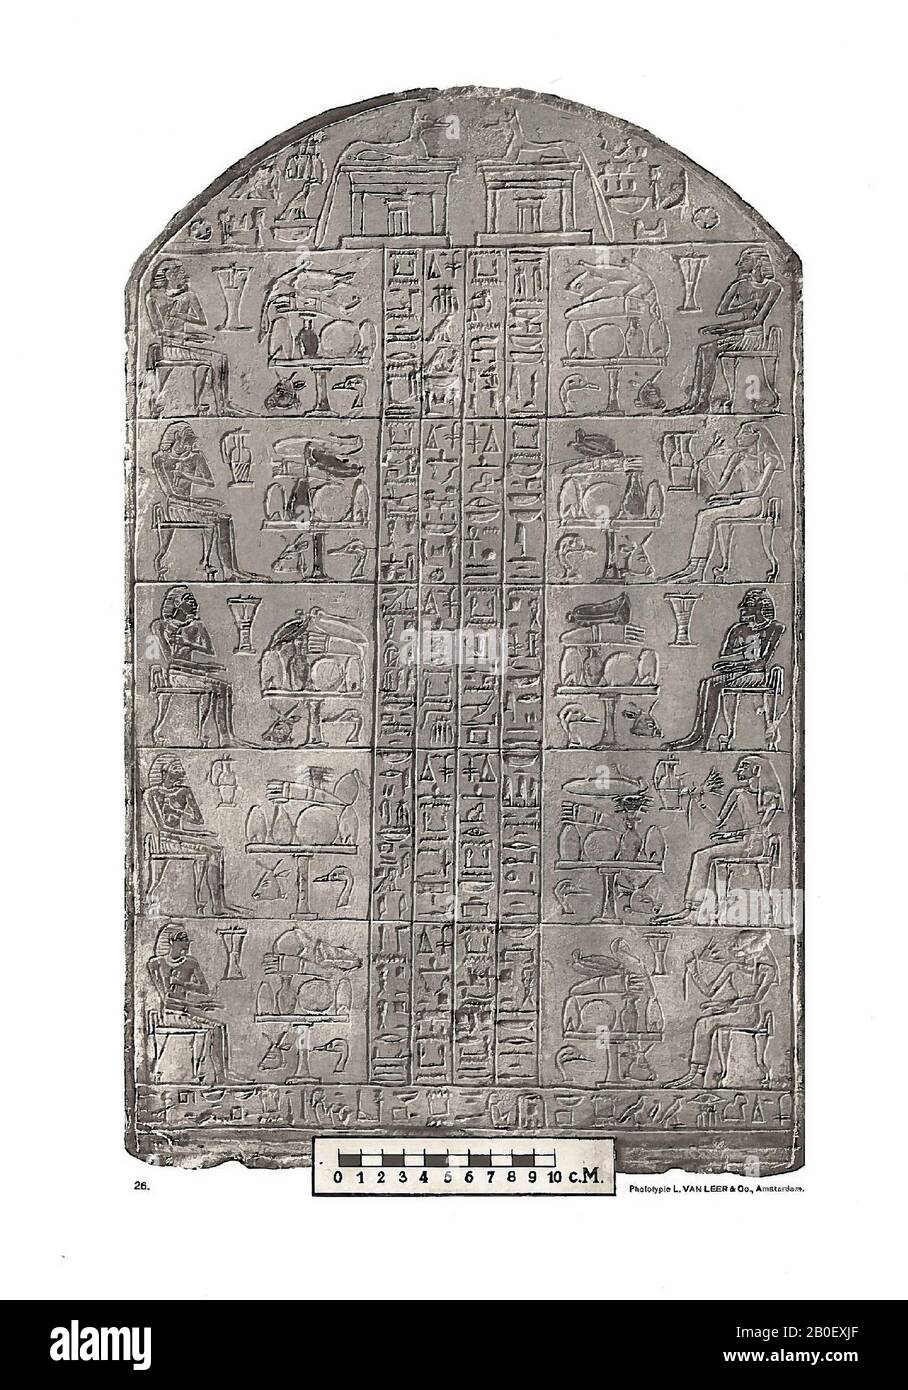 miscellaneous, round bow, This on this round bower does not seem to be made by order of one specific person: a total of ten men and women are depicted. The top is decorated with two jackals seated on a shrine. The stela is divided into ten planes that are always separated in the middle by four lines of inscription. These text lines are offer formulas, addressed to the gods Osiris and Wepwawet, among others. Every person depicted sits on a chair in front of a sacrificial table. The three women all have a lotus flower in their hand, the seven men a piece of double folded fabric., The stela has Stock Photo